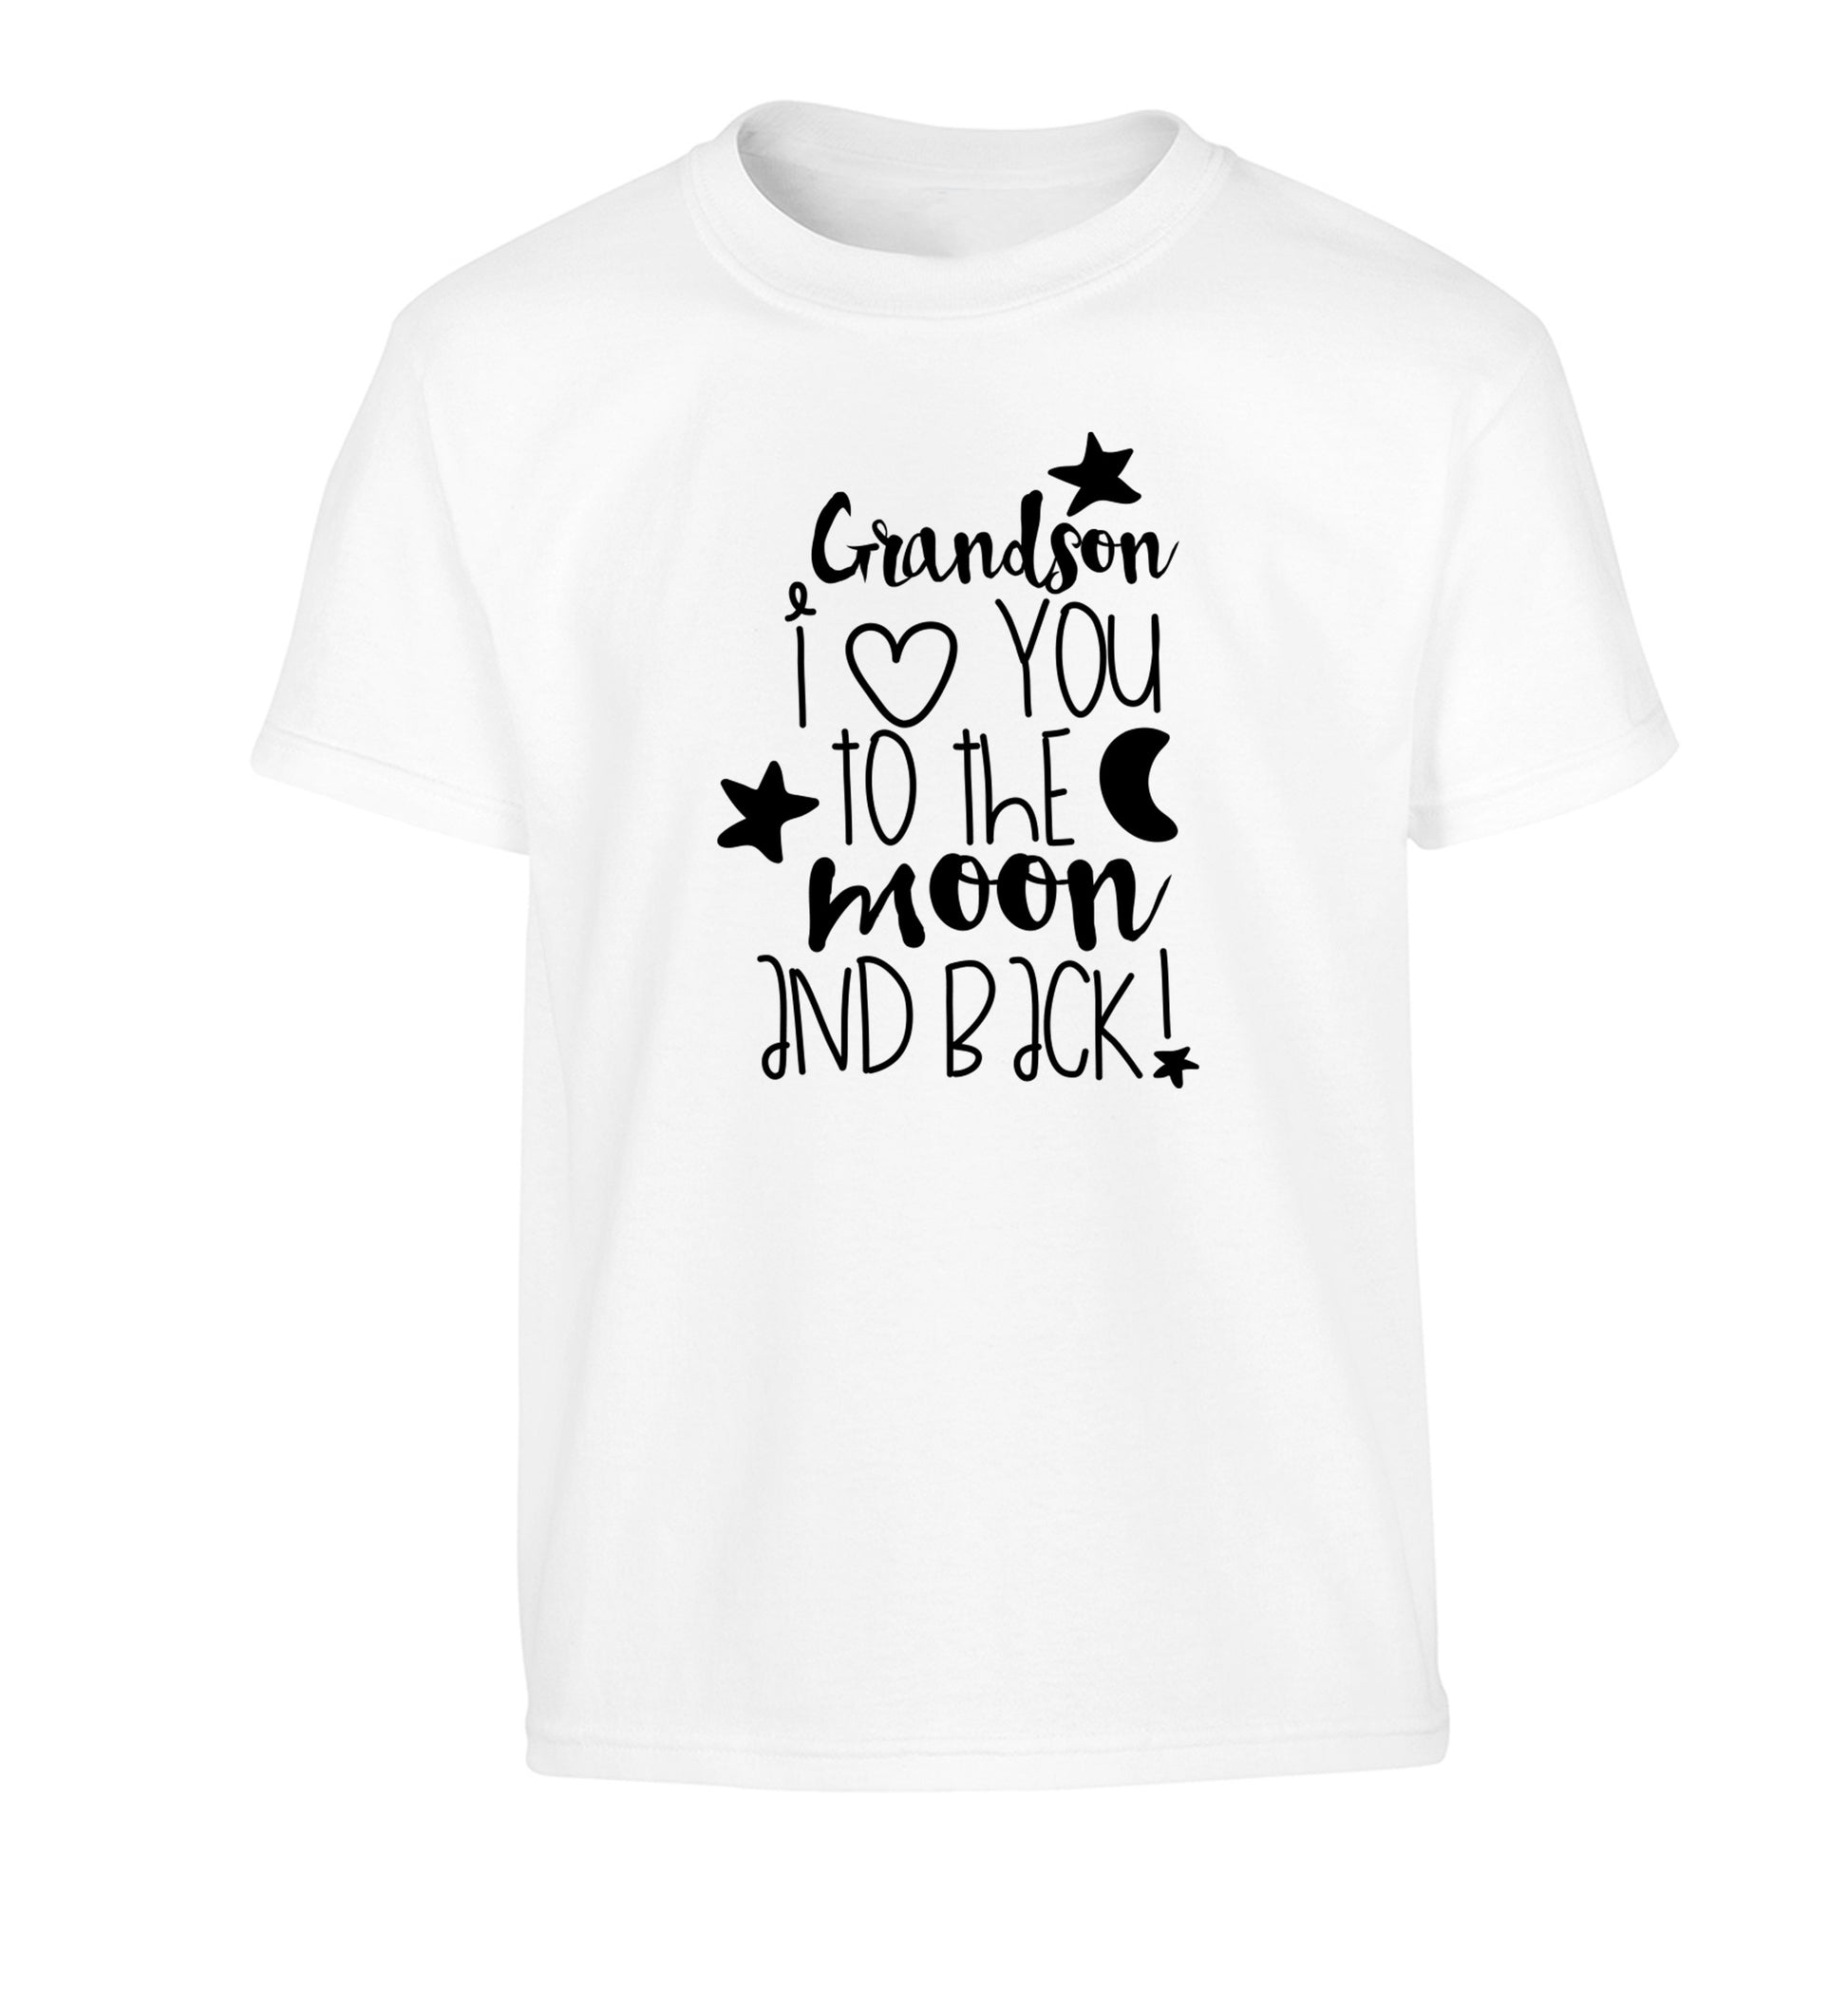 Grandson I love you to the moon and back Children's white Tshirt 12-14 Years